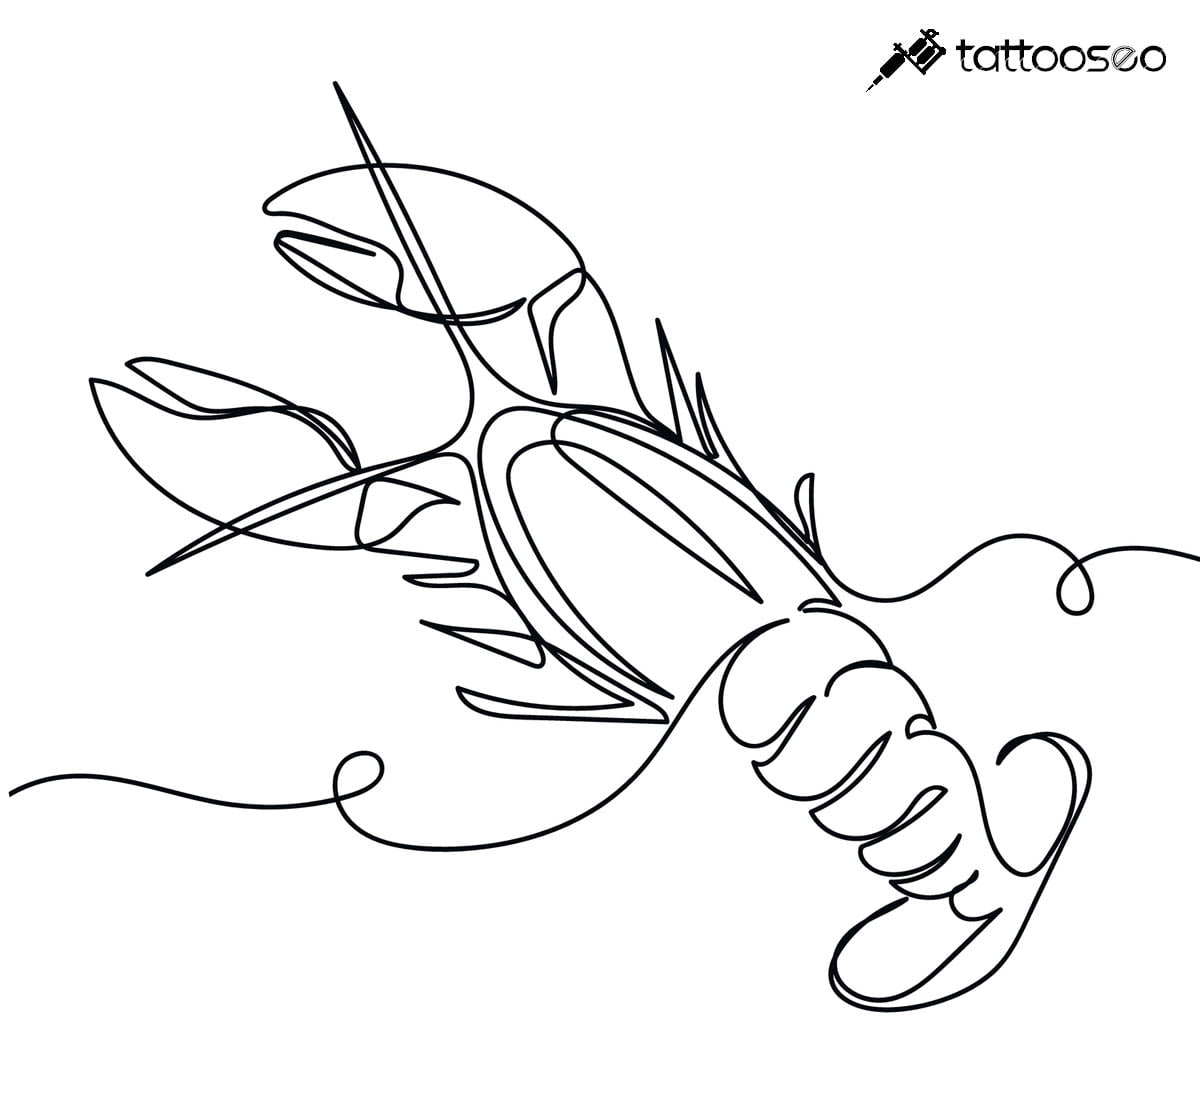 Lobster tattoo meaning